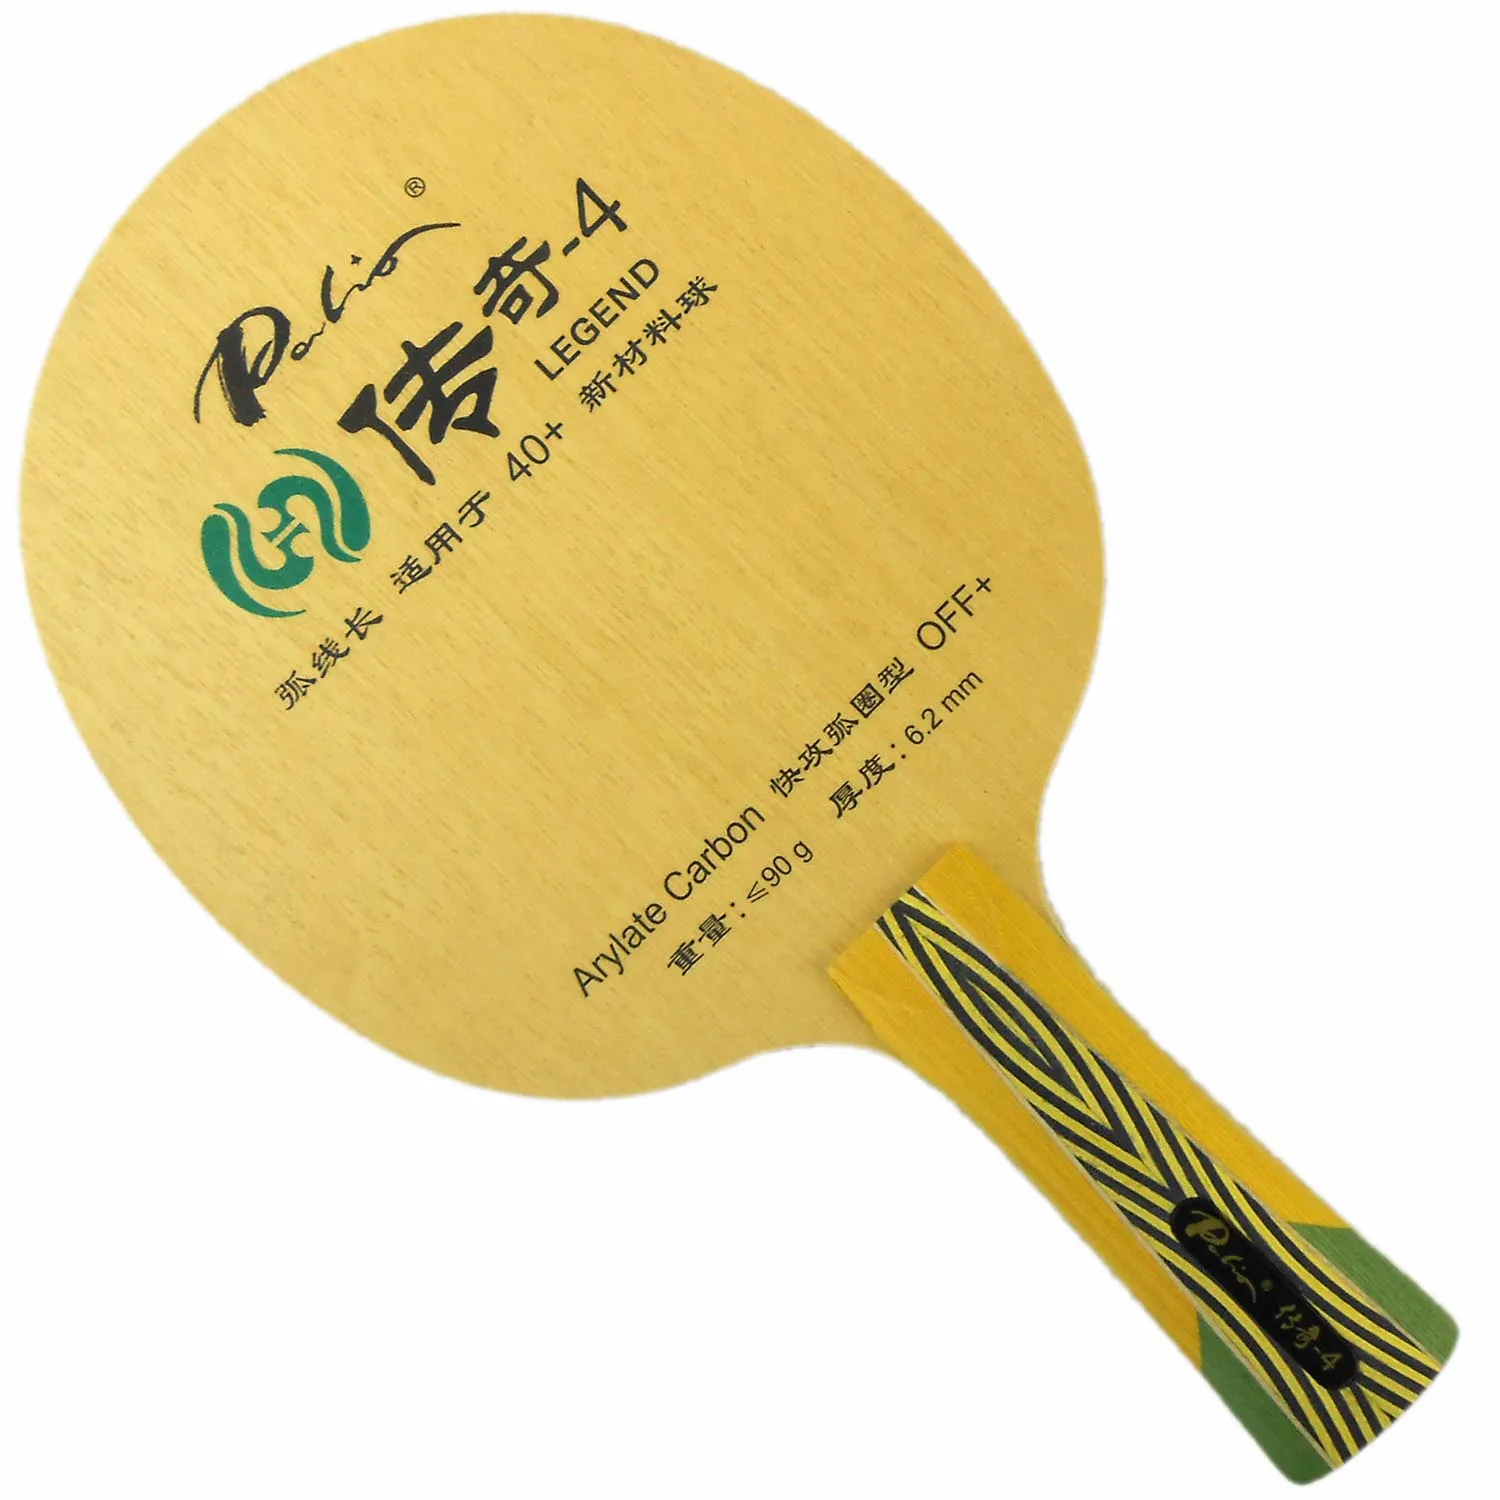 

Palio Legend-4 (Legend4, Legend 4) OFF+ Table Tennis Blade for Ping Pong Racket